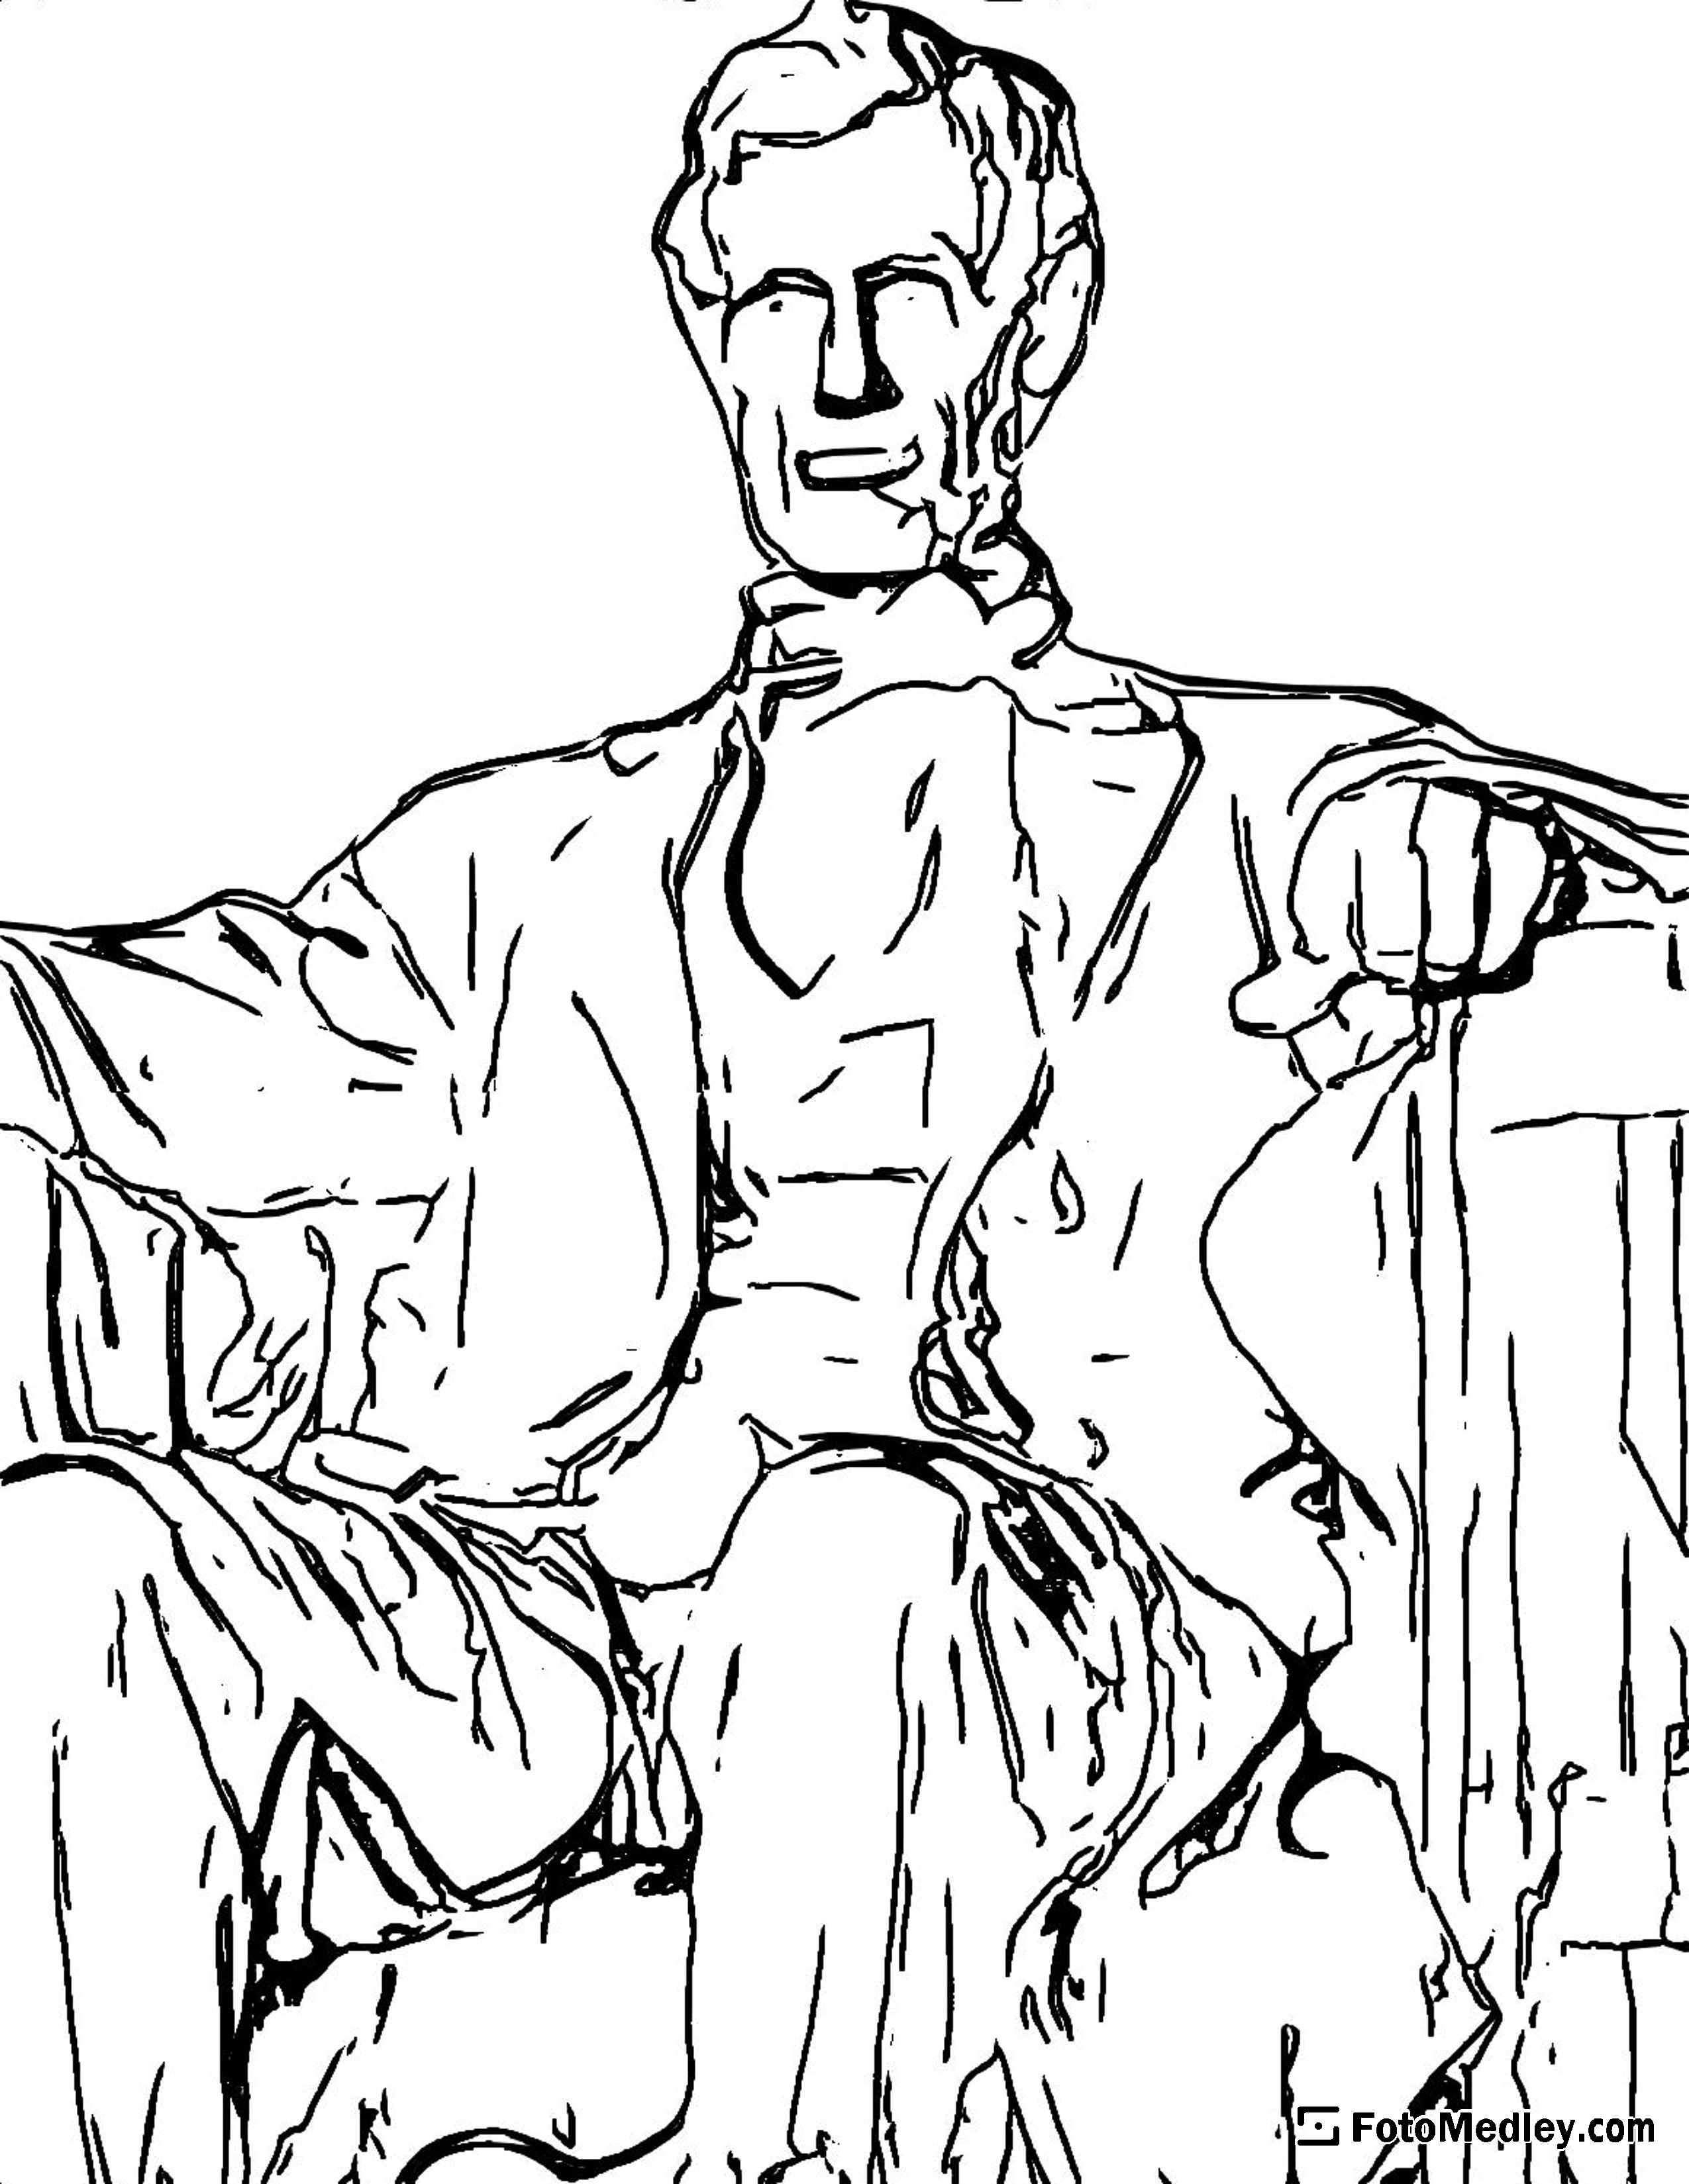 A coloring page of the Abraham Lincoln Memorial in Washington D.C.